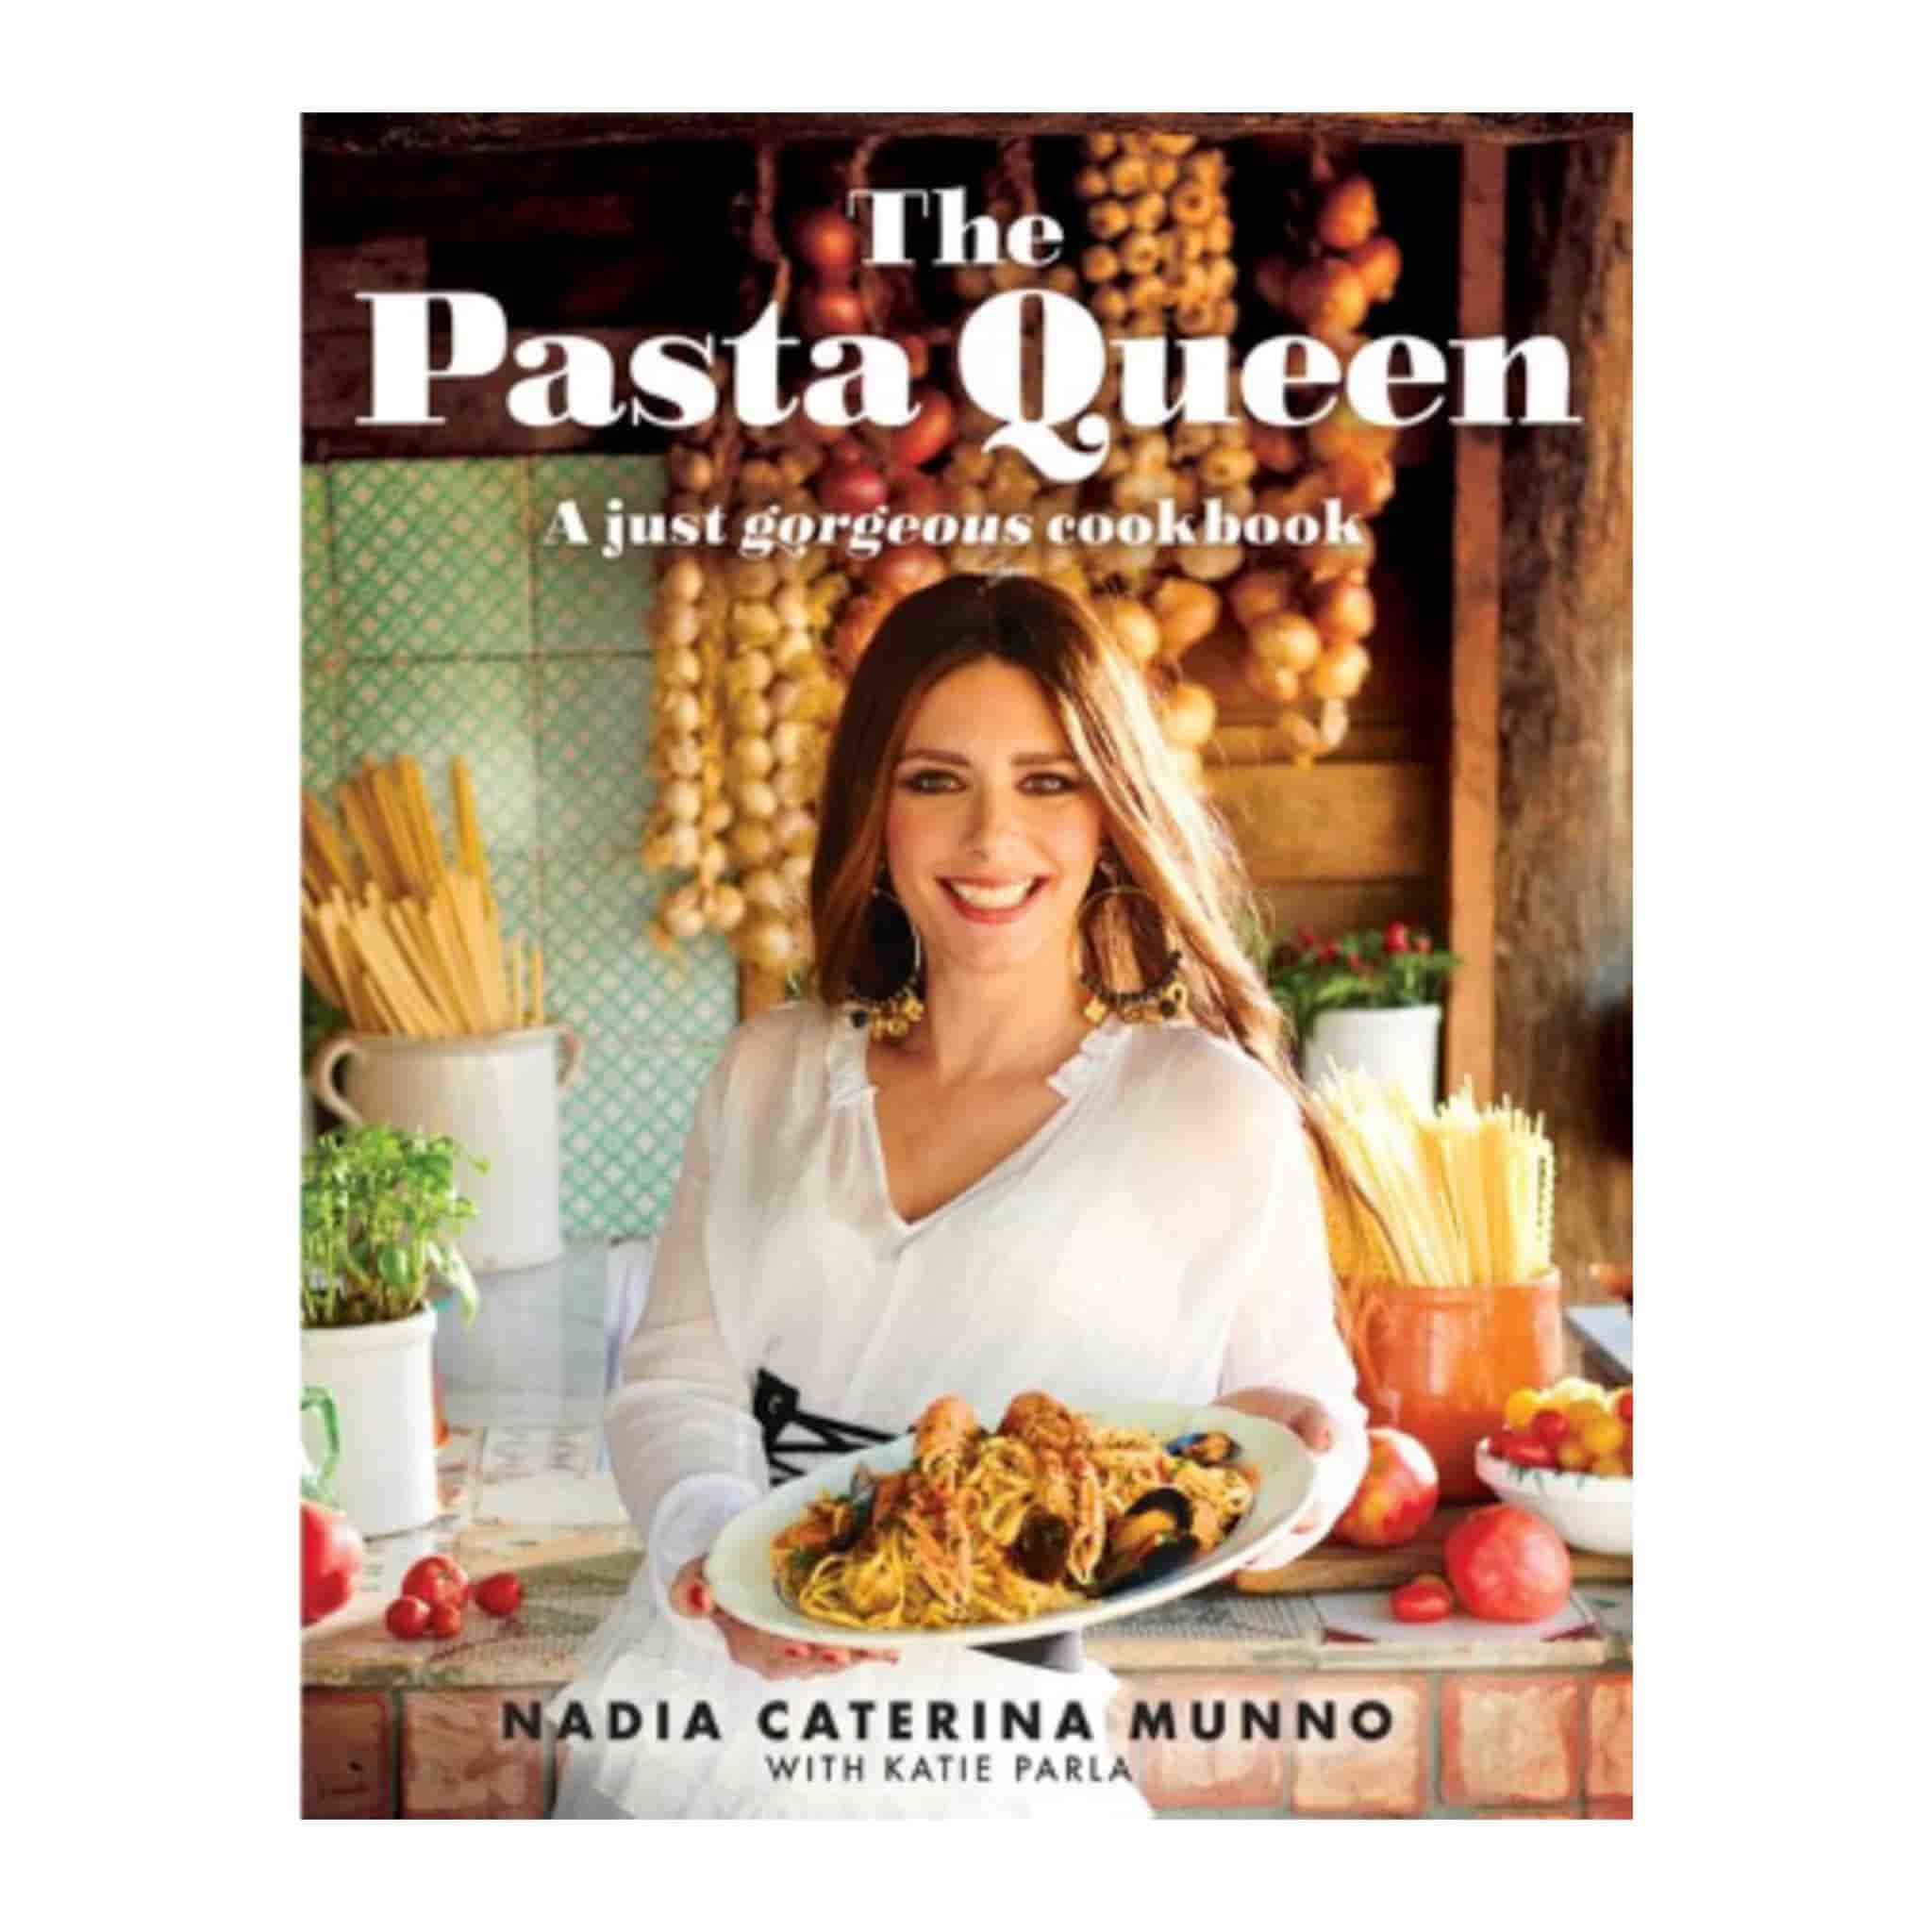 The Pasta Queen, by Nadia Caterina Munno